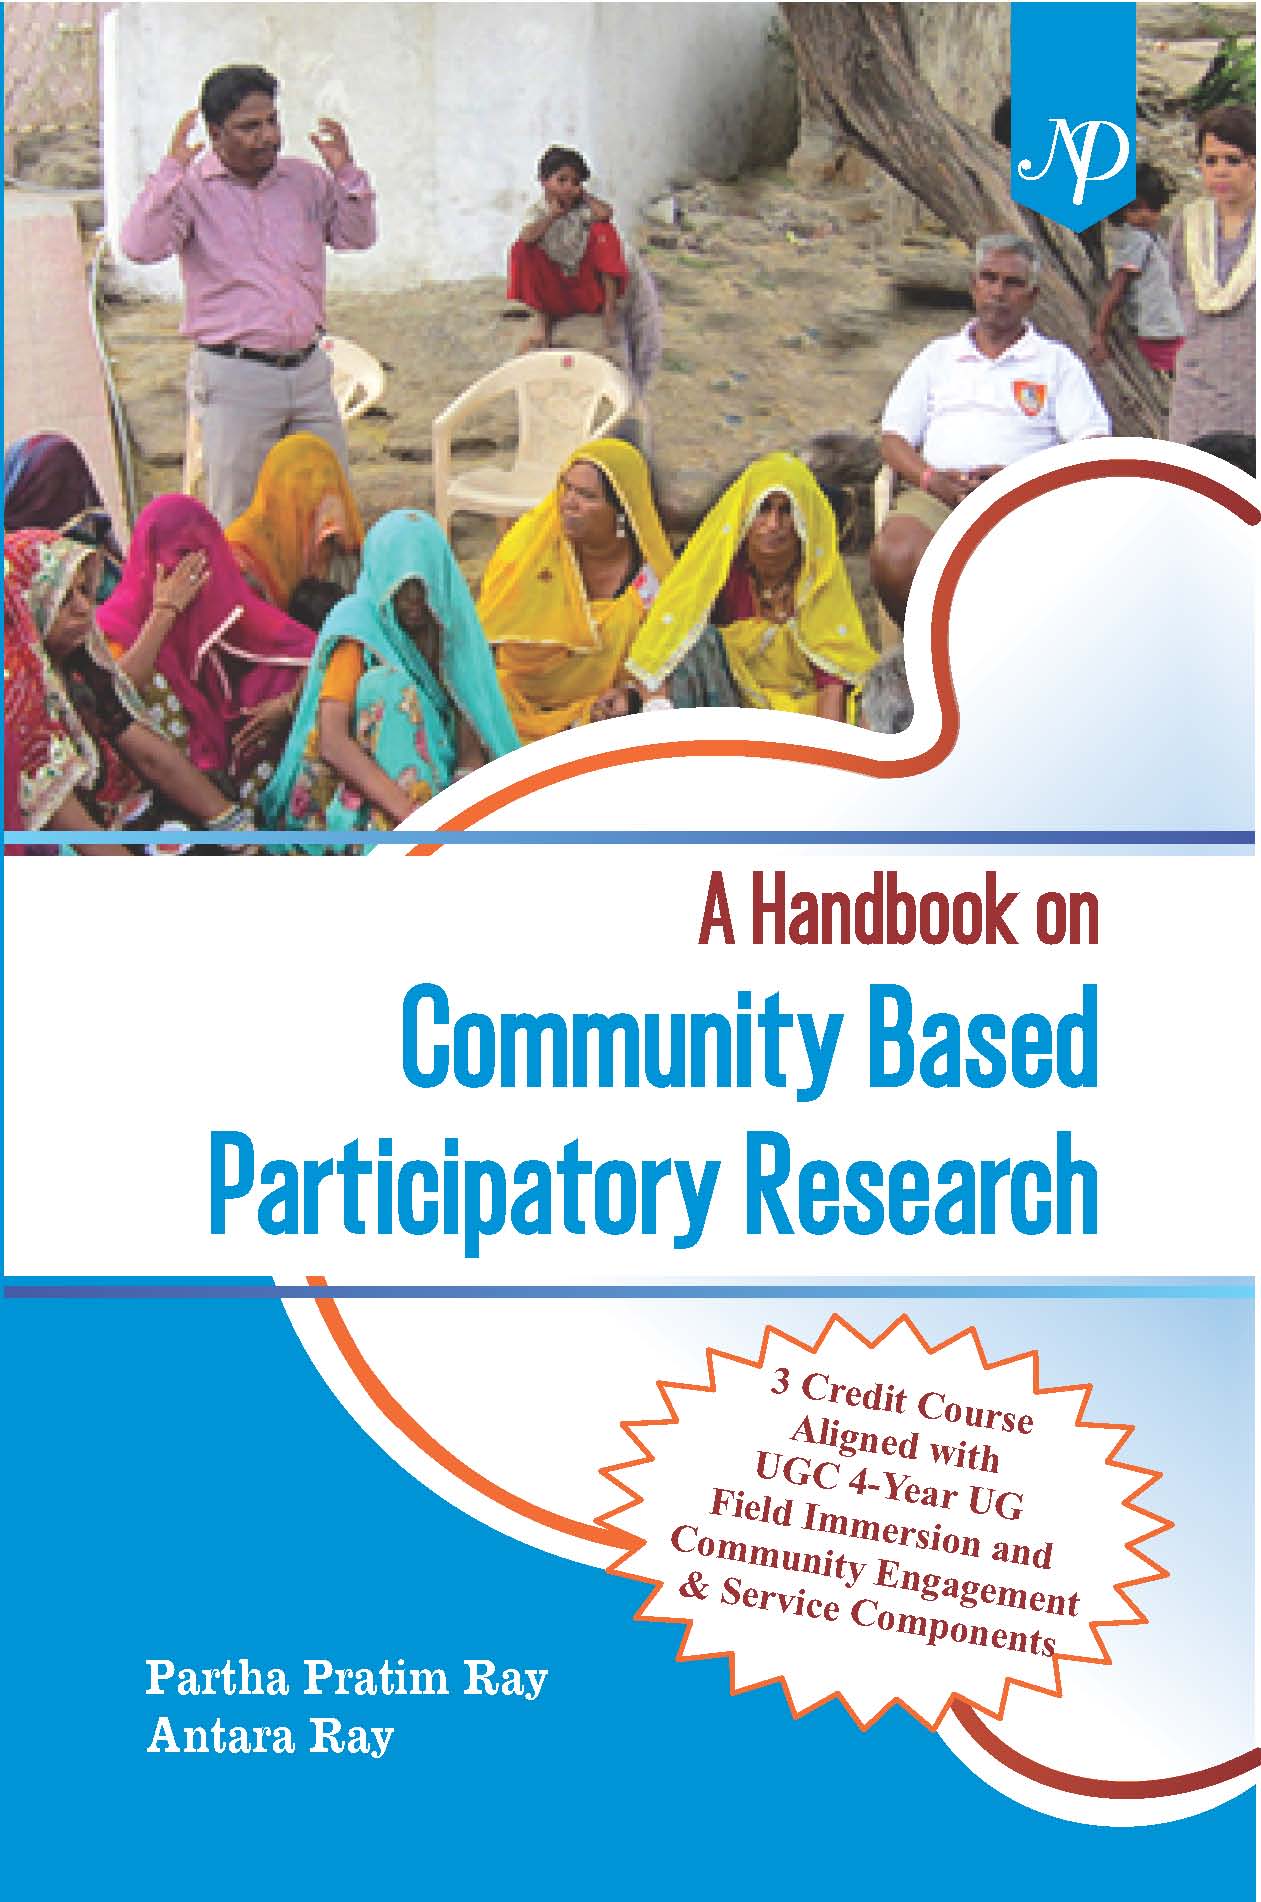 A Handbook on Community Based Participatory Cover.jpg